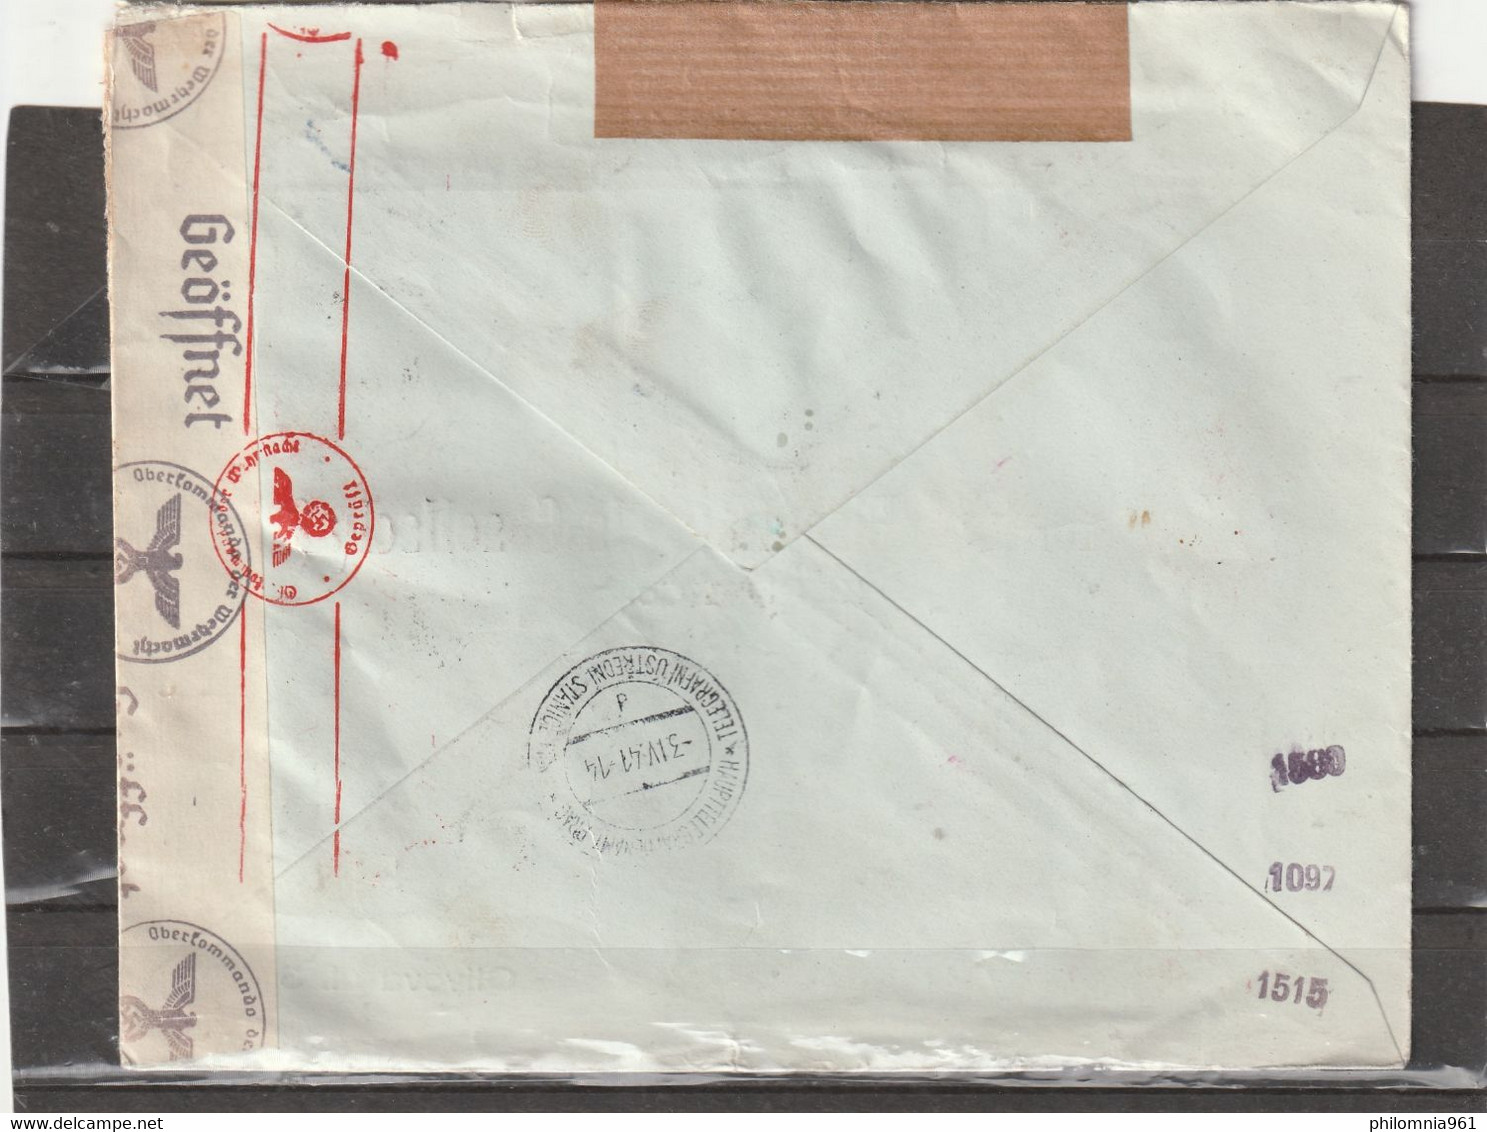 Romania WWII AIRMAIL CENSORED COVER 1941 - Lettres 2ème Guerre Mondiale